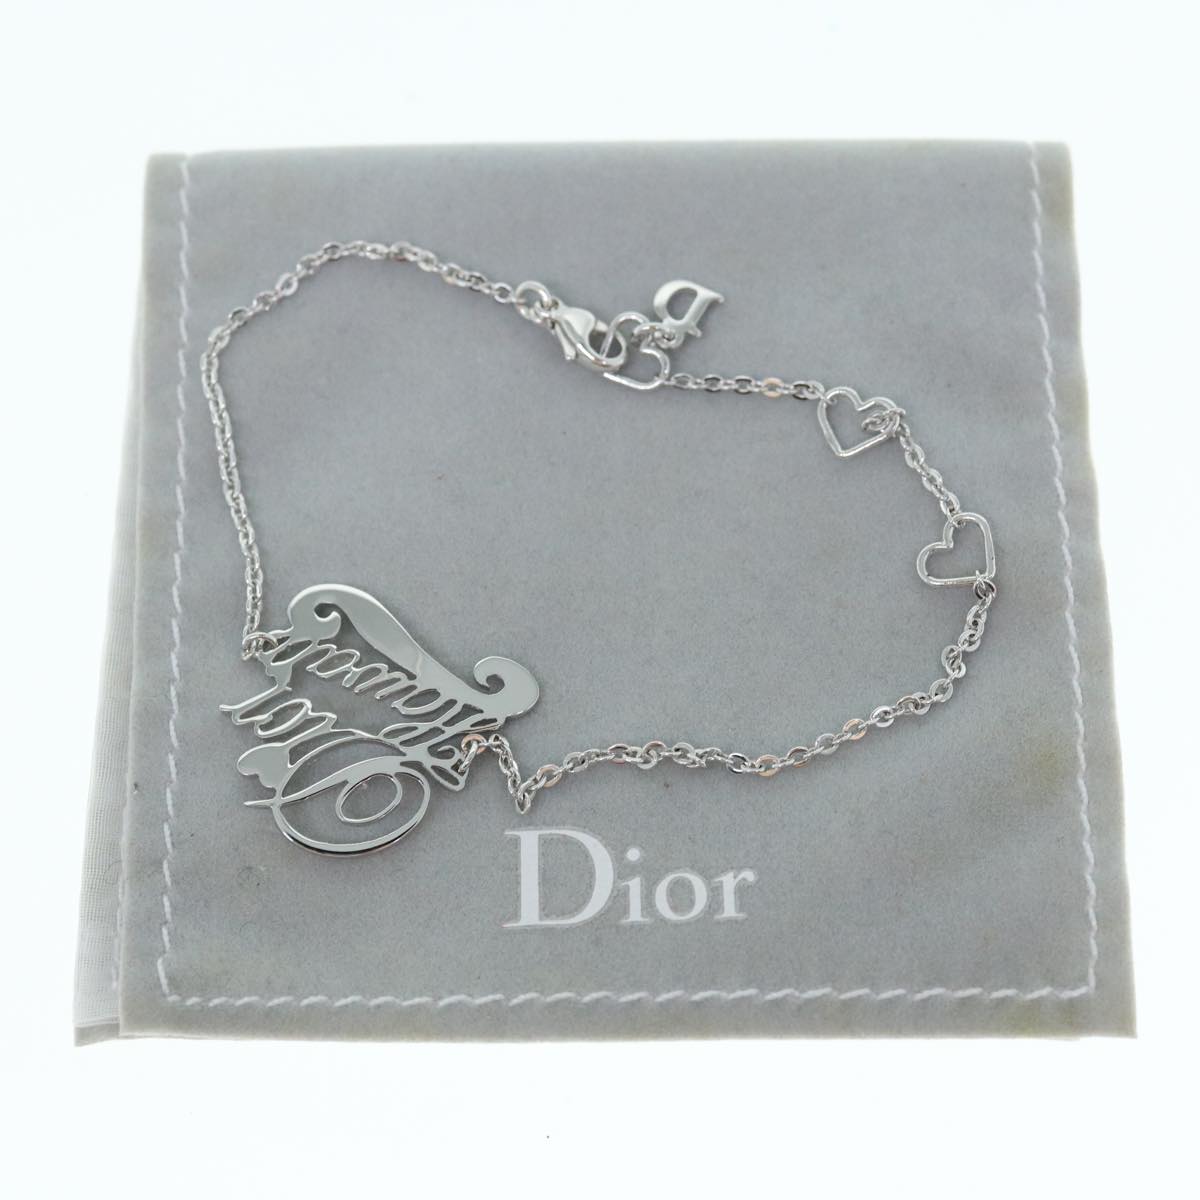 Dior Women's Silver Metal Bracelet by Christian Dior in Silver